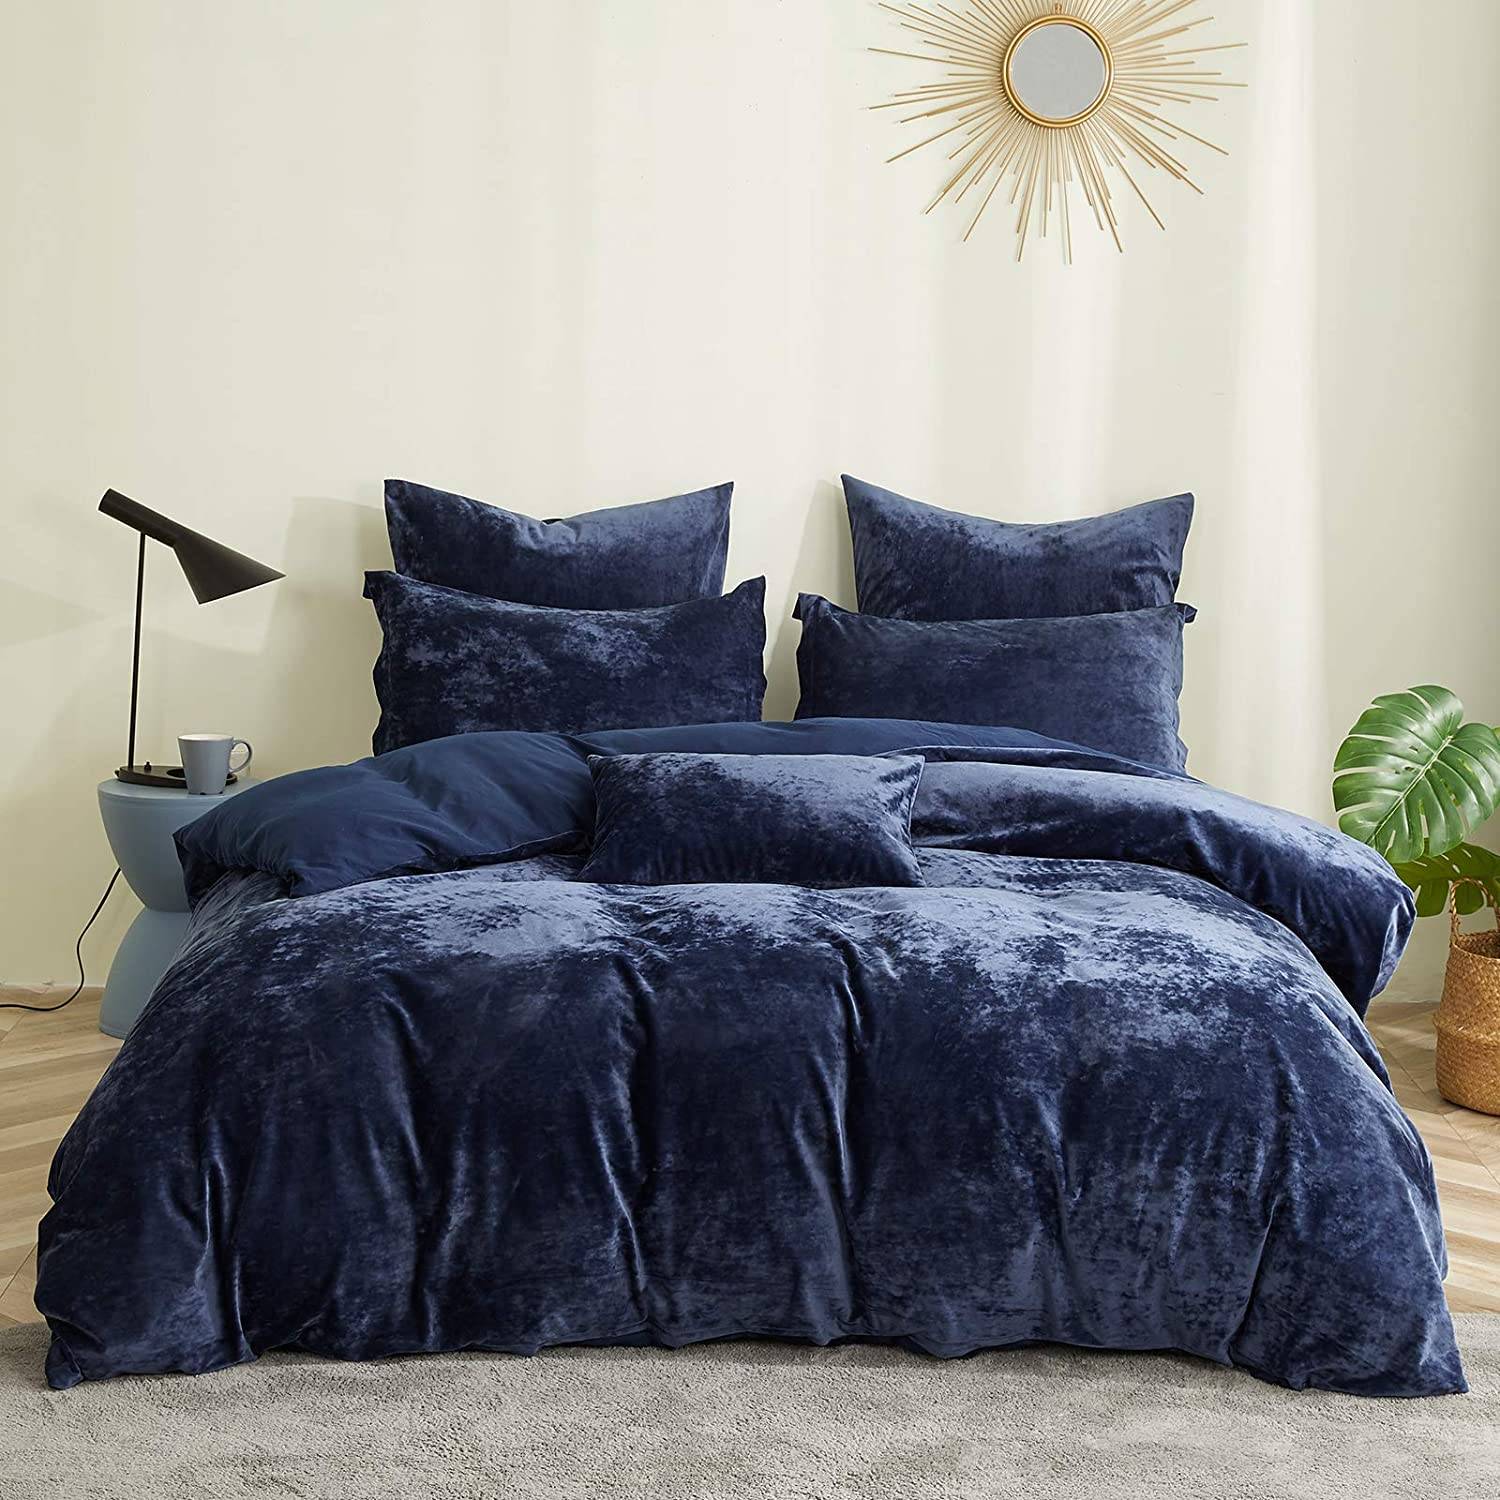 China Gold Supplier for Cotton Pajamas - Heavyweight Velvet Duvet Cover Set give a comfortable feeling in bedding – SUPER